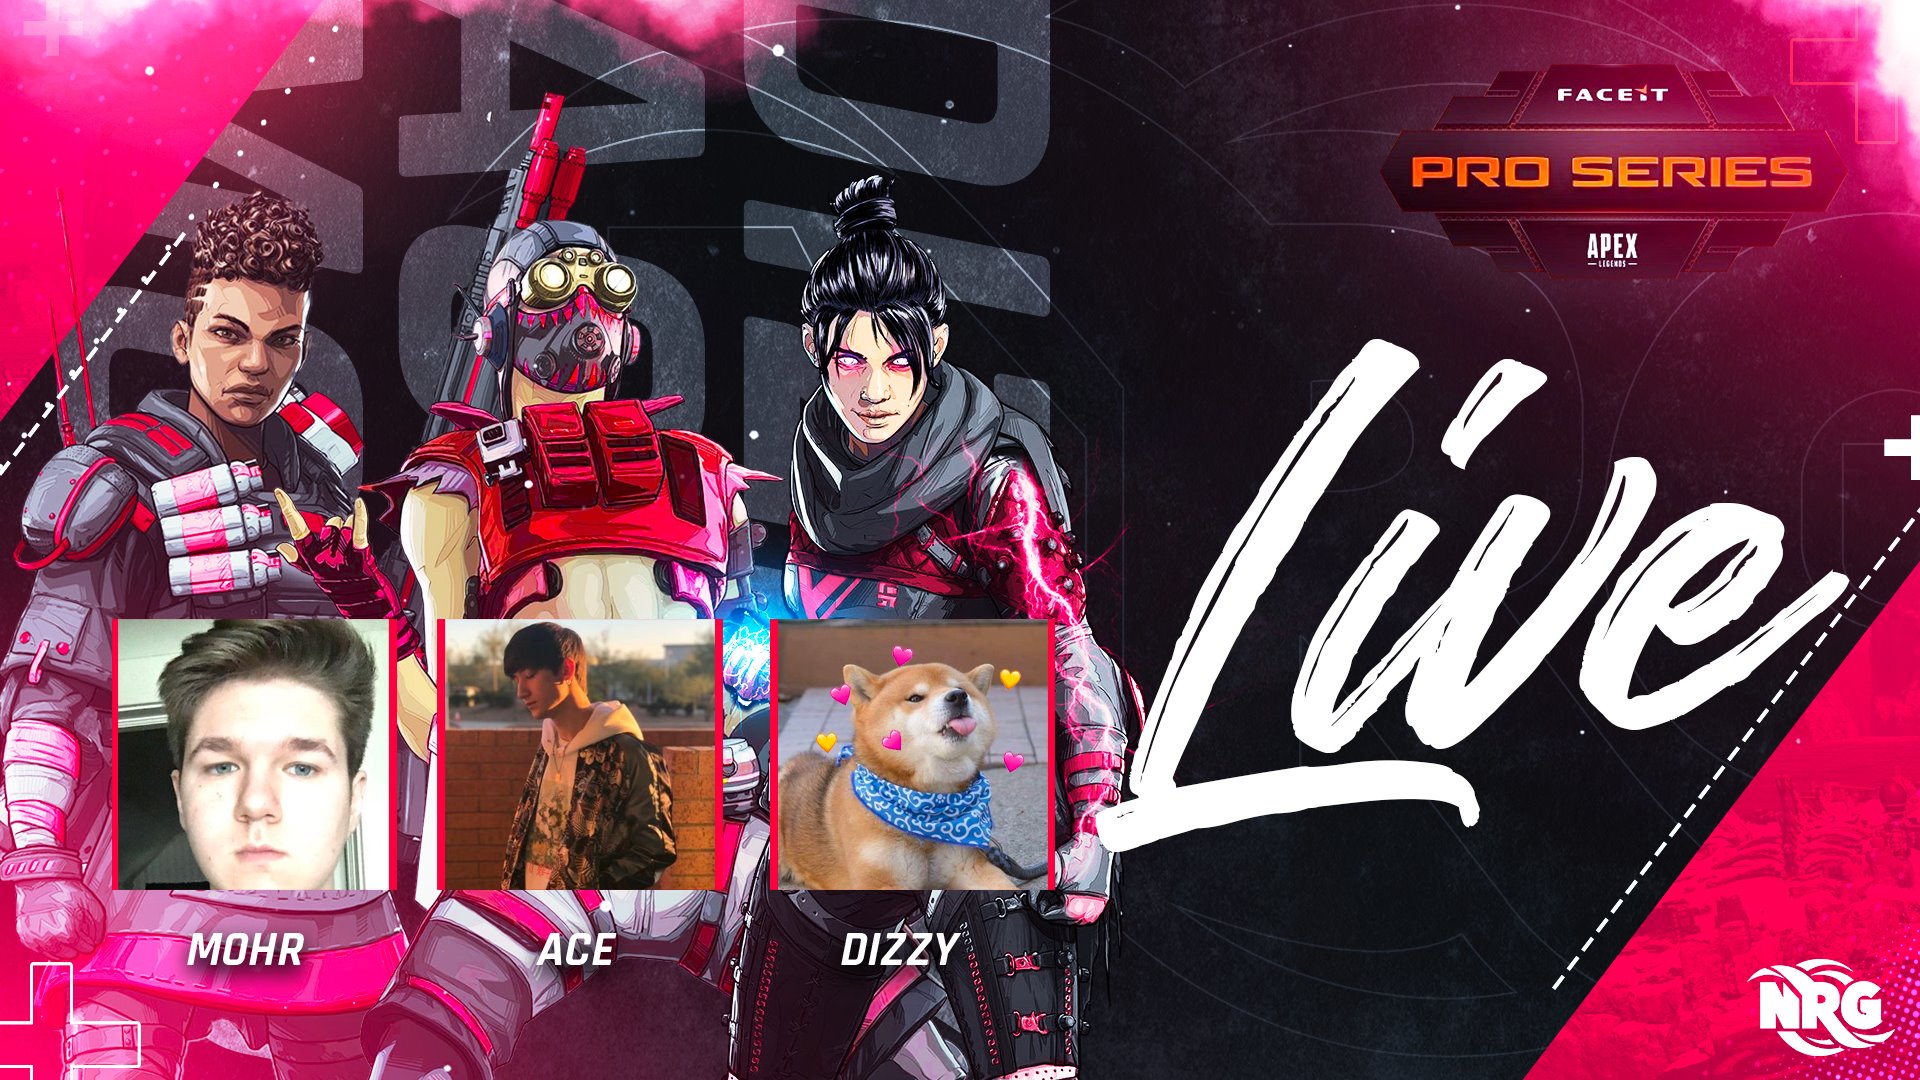 Nrg The Faceit Pro Series Apex Legends League Is Live And Our Guys Are About To Put Us Dizzy Itsmohr Letmeace Faceitapex T Co Ivzw0g9s0k Twitter